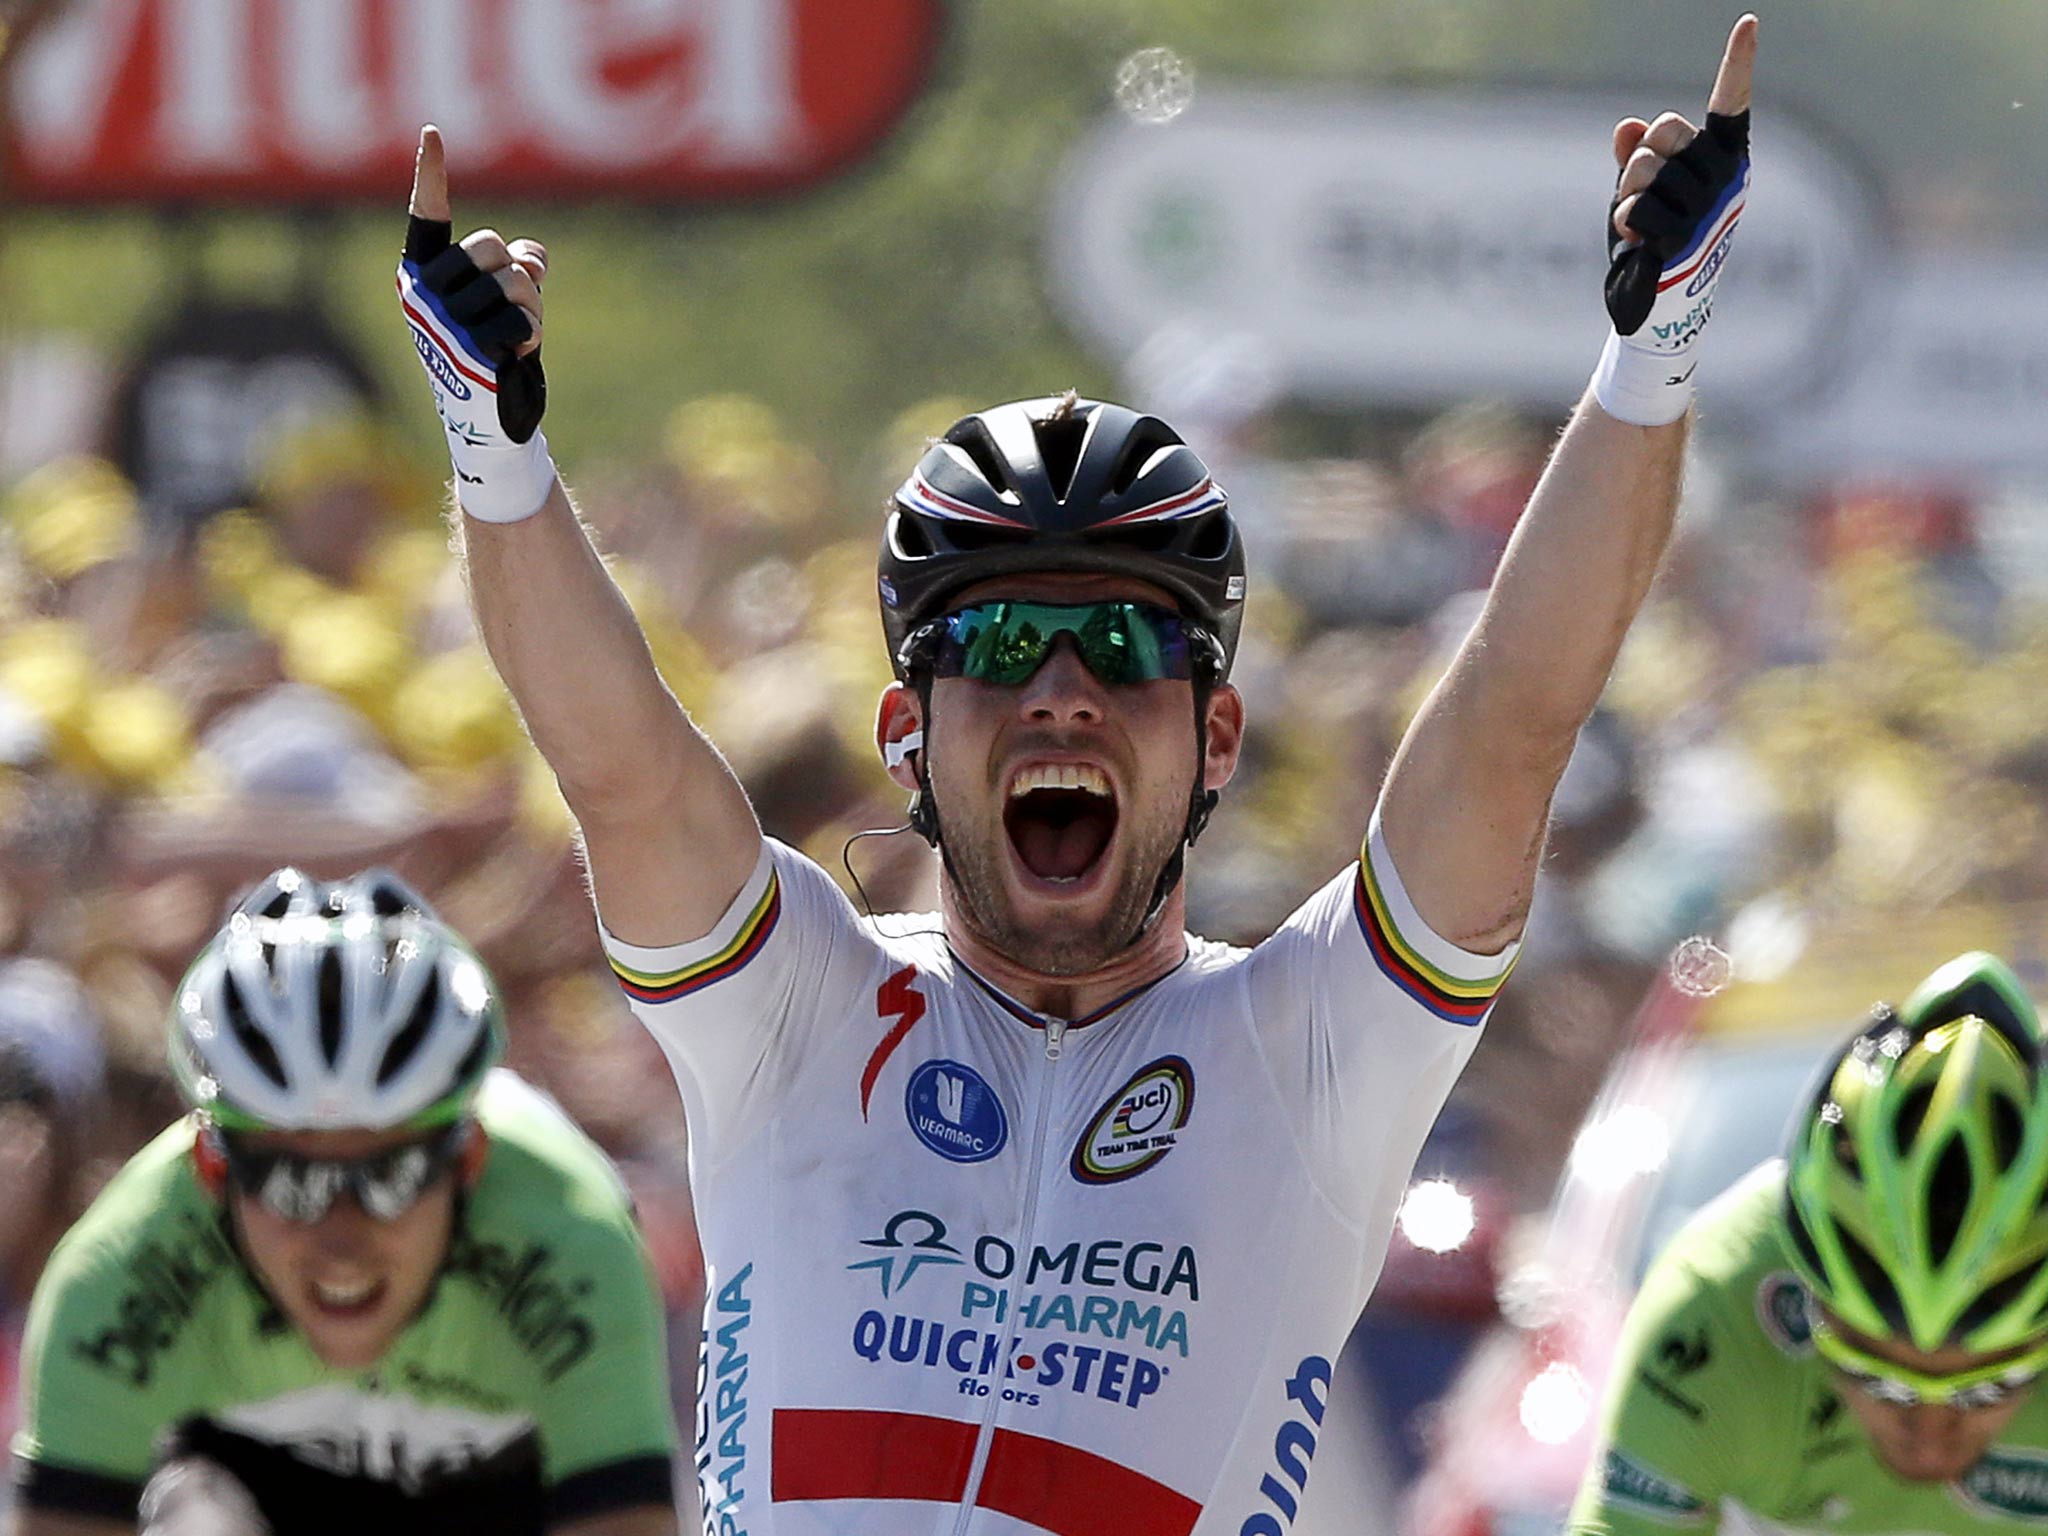 Mark Cavendish wins stage 13 of the Tour